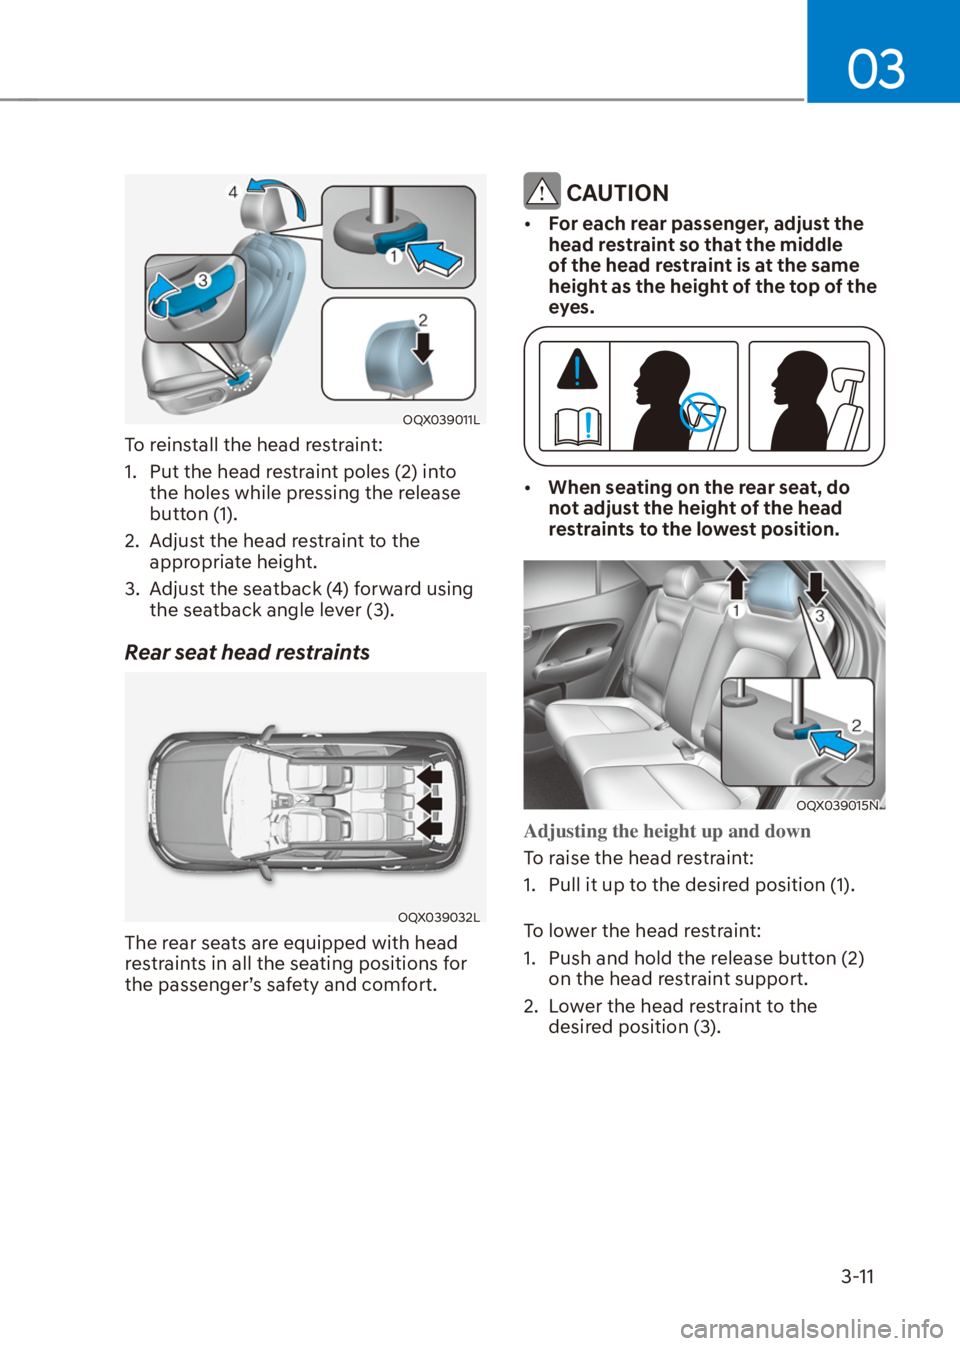 HYUNDAI VENUE 2021 Owners Guide 03
3-11
OQX039011L
To reinstall the head restraint:
1.  Put the head restraint poles (2) into 
the holes while pressing the release 
button (1).
2.  Adjust the head restraint to the 
appropriate heigh